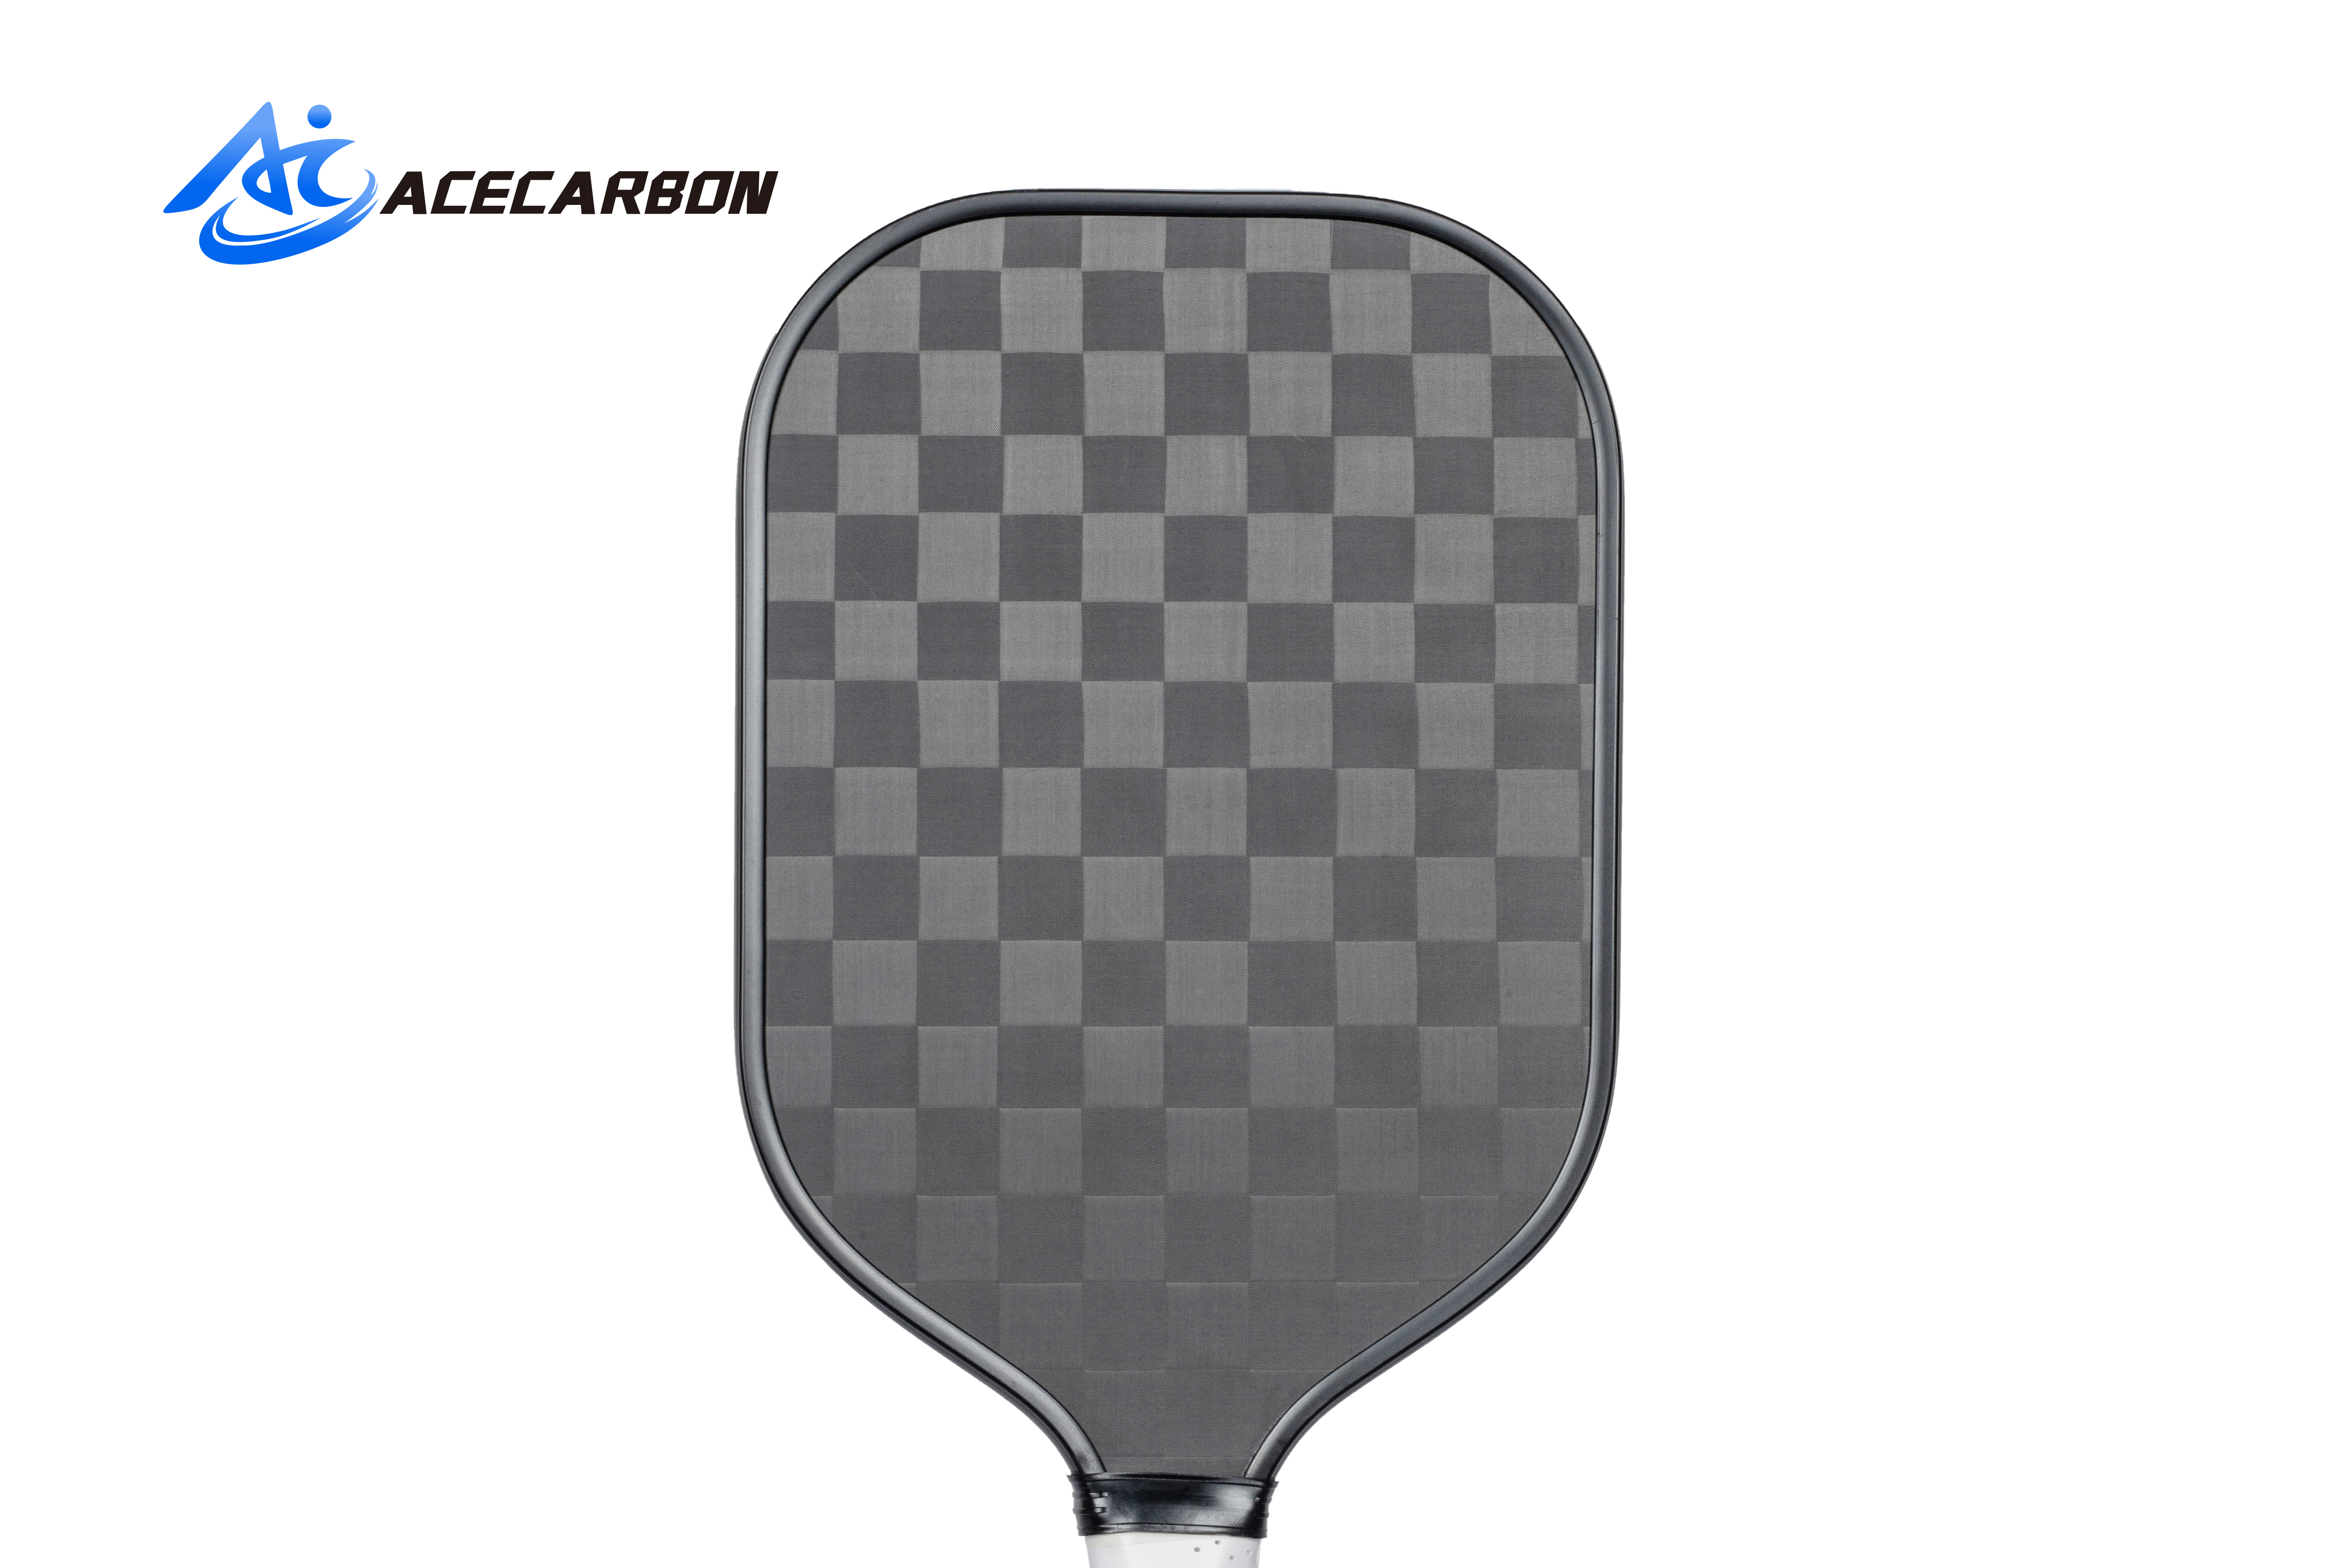 ACECARBON Showcases Innovative Carbon Fiber Sports Equipment at Global Sports Expo